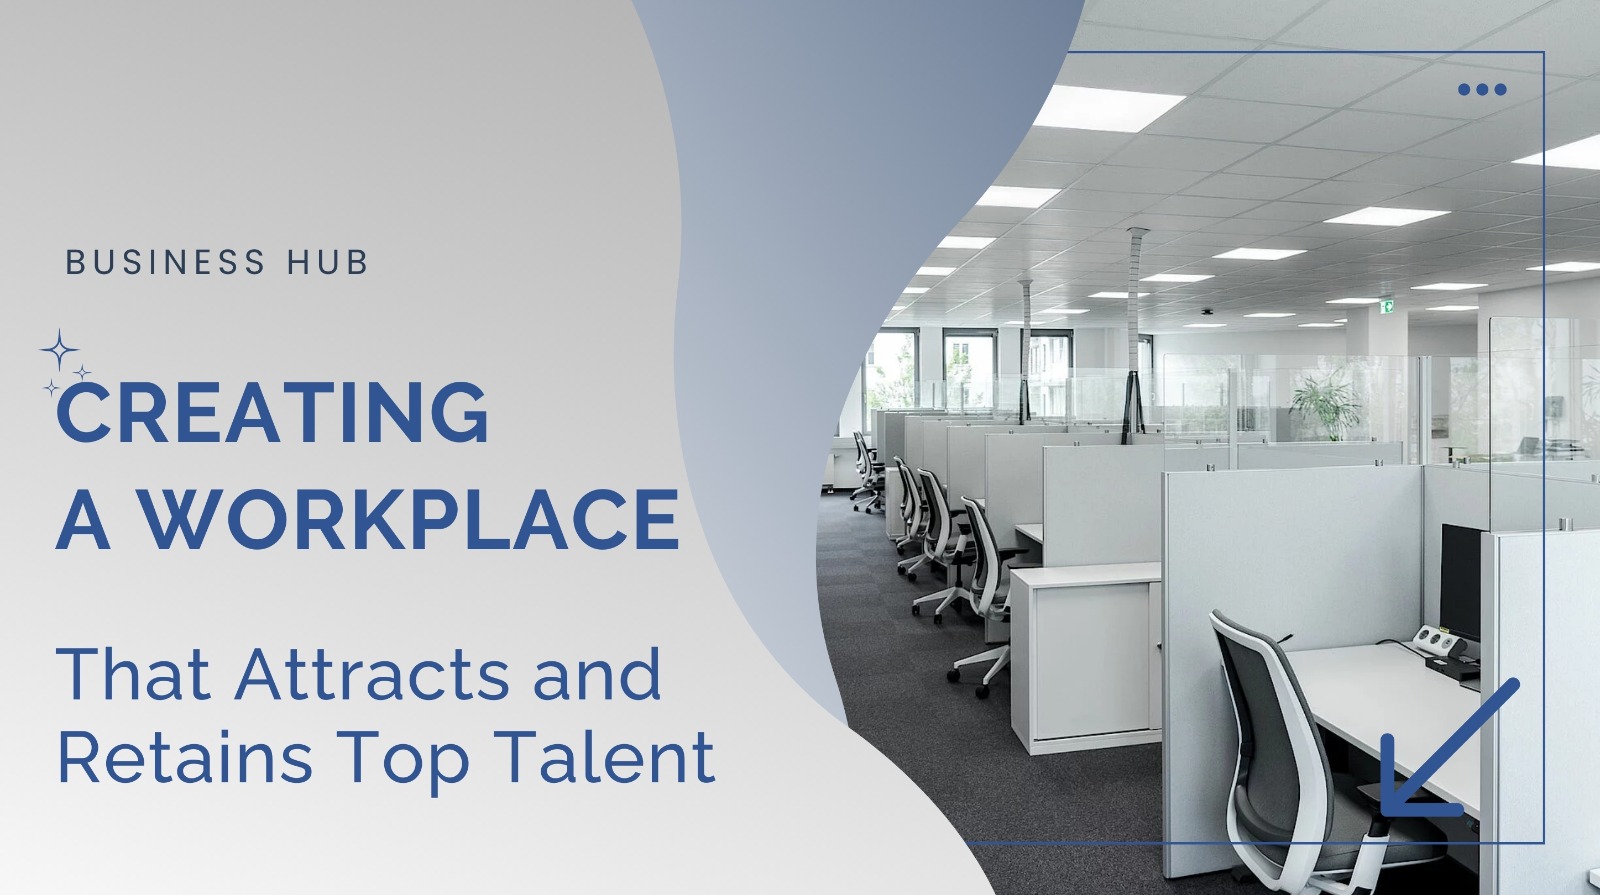 Creating A Workplace That Attracts and Retains Top Talent